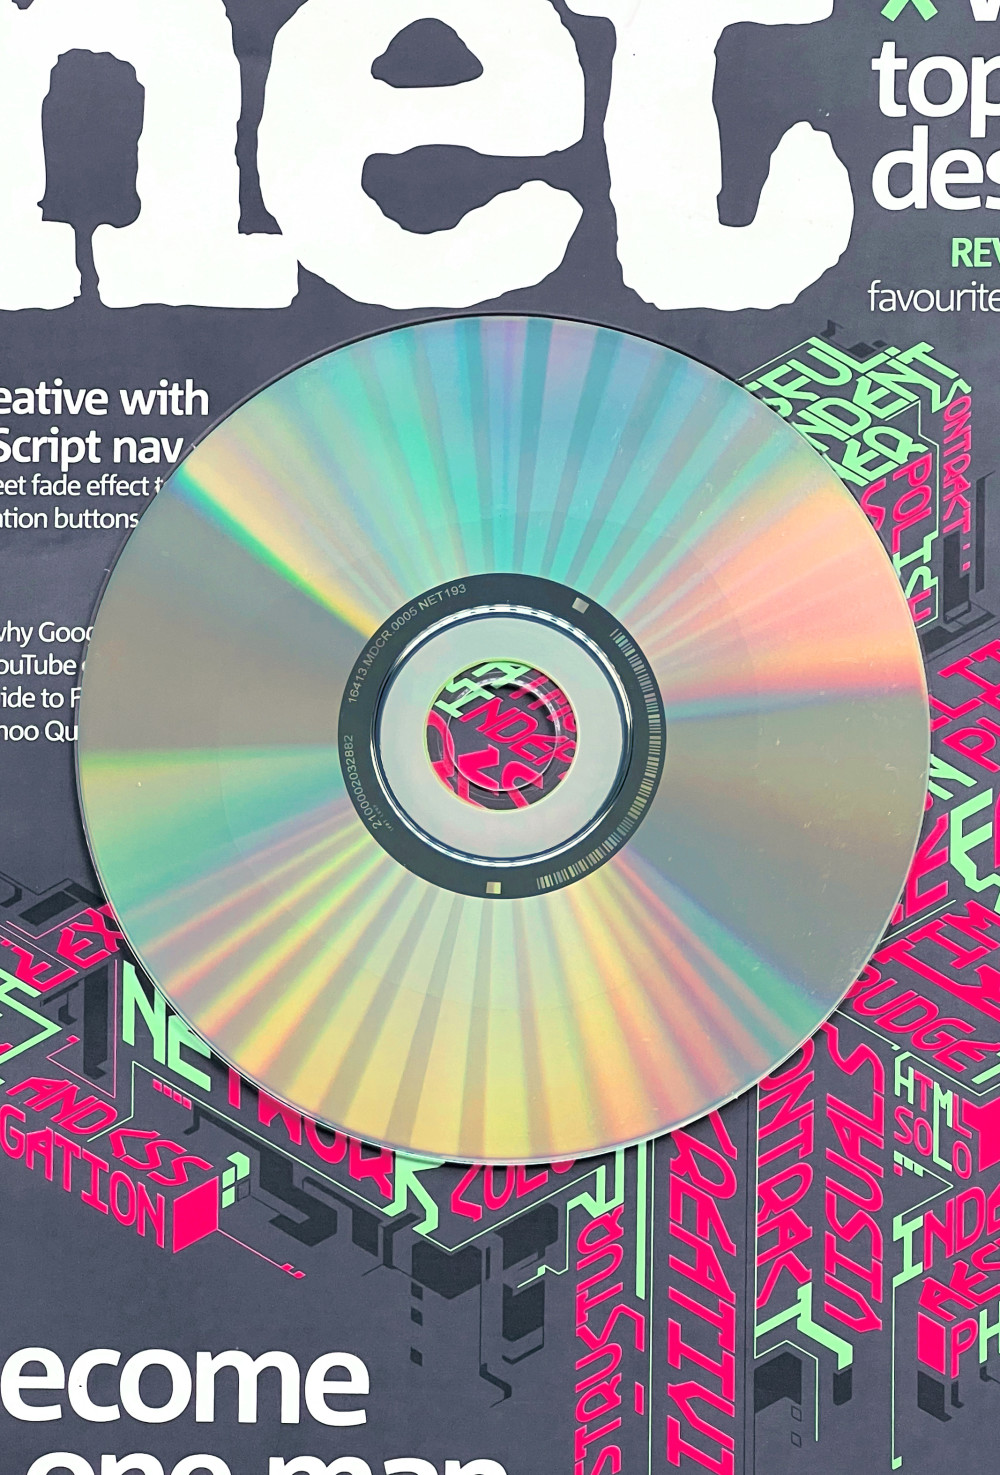 Compact Disk from net UK Magazine. Issue 199. September 2009